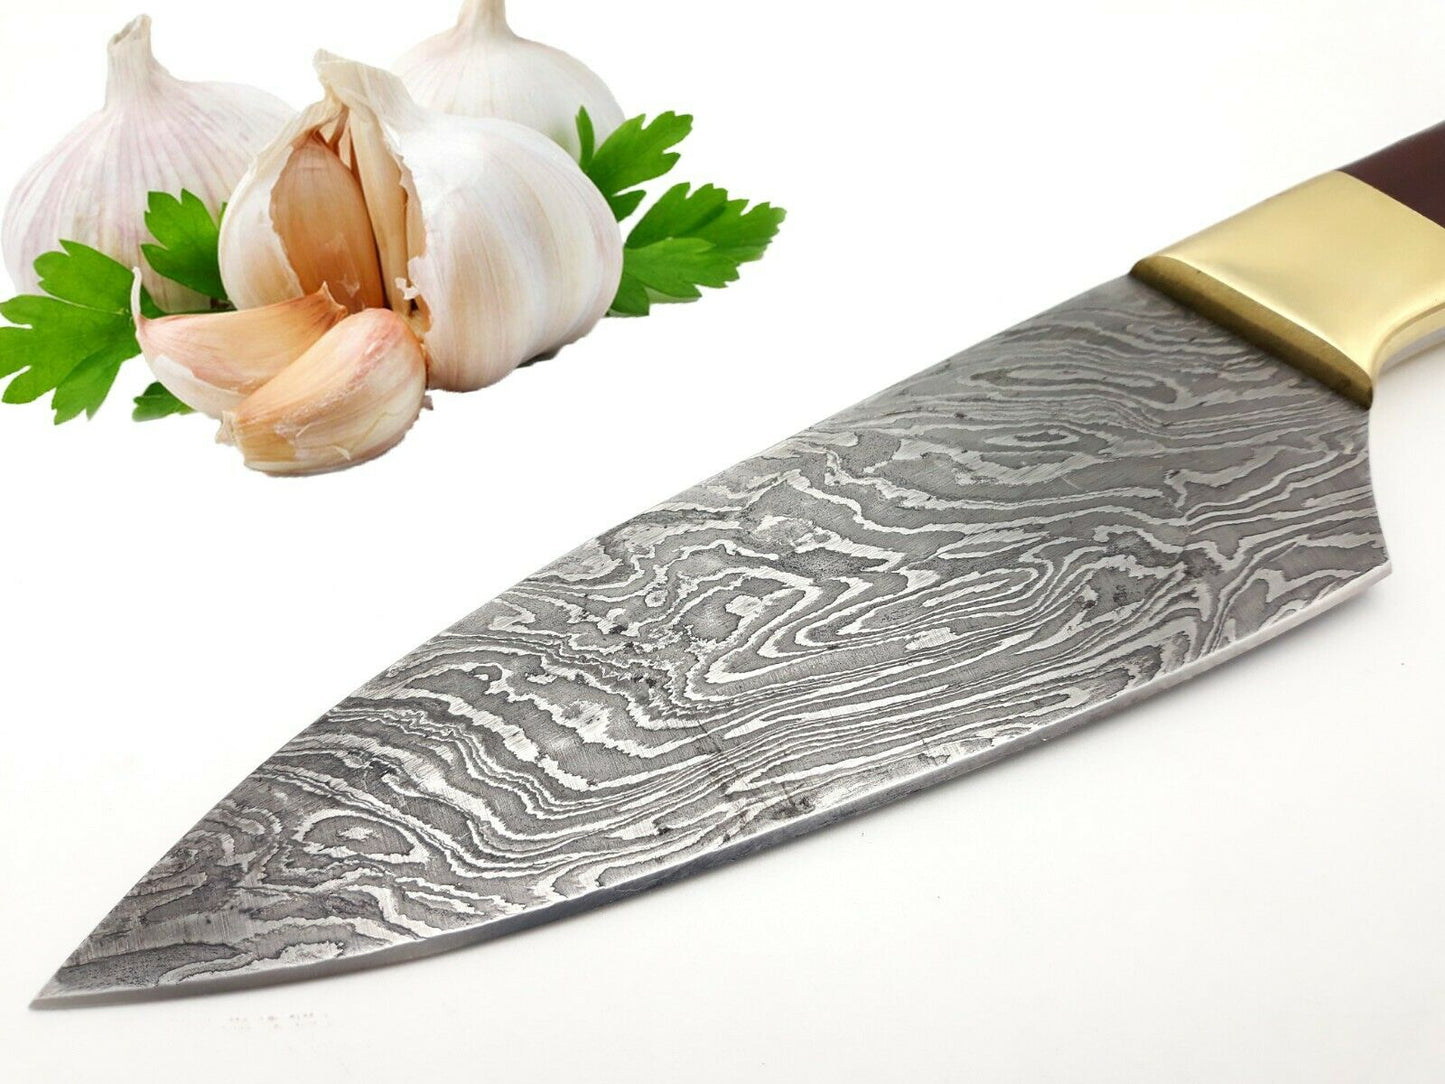 Masterfully Crafted 10-Inch Damascus Chef's Knife: Unrivaled Sharpness, Full Tang Design, Complete with Sheath"